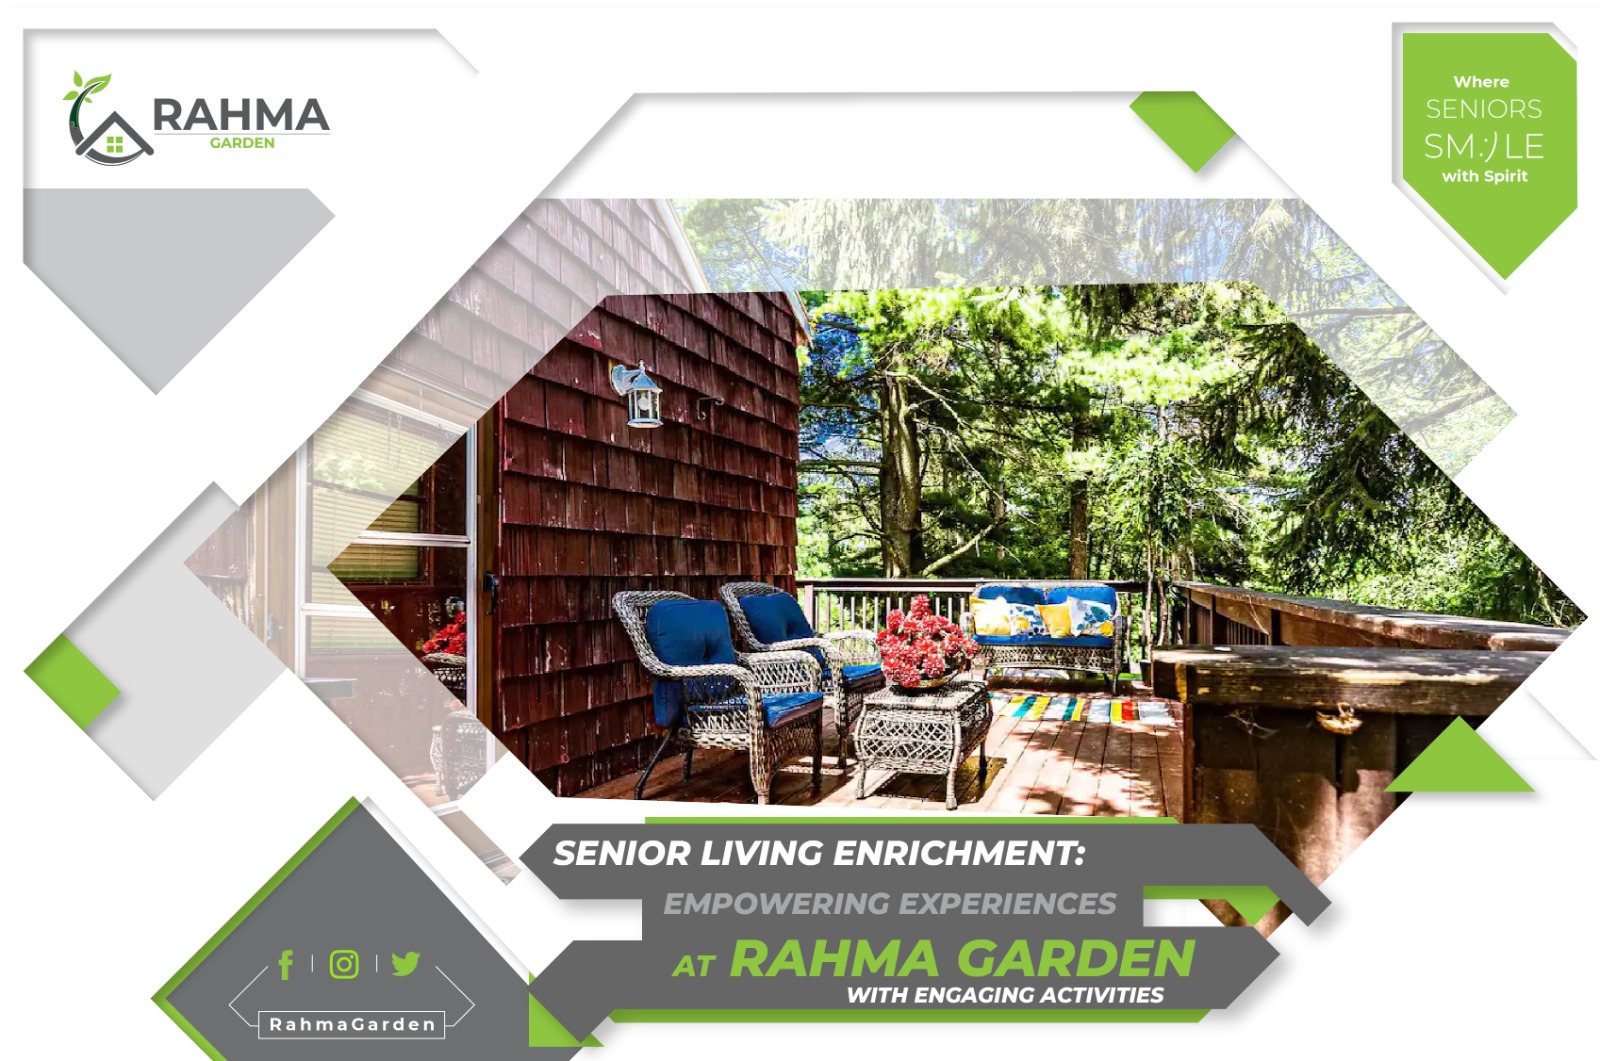 Senior Living Enrichment: Empowering Experiences at Rahma Garden with Engaging Activities